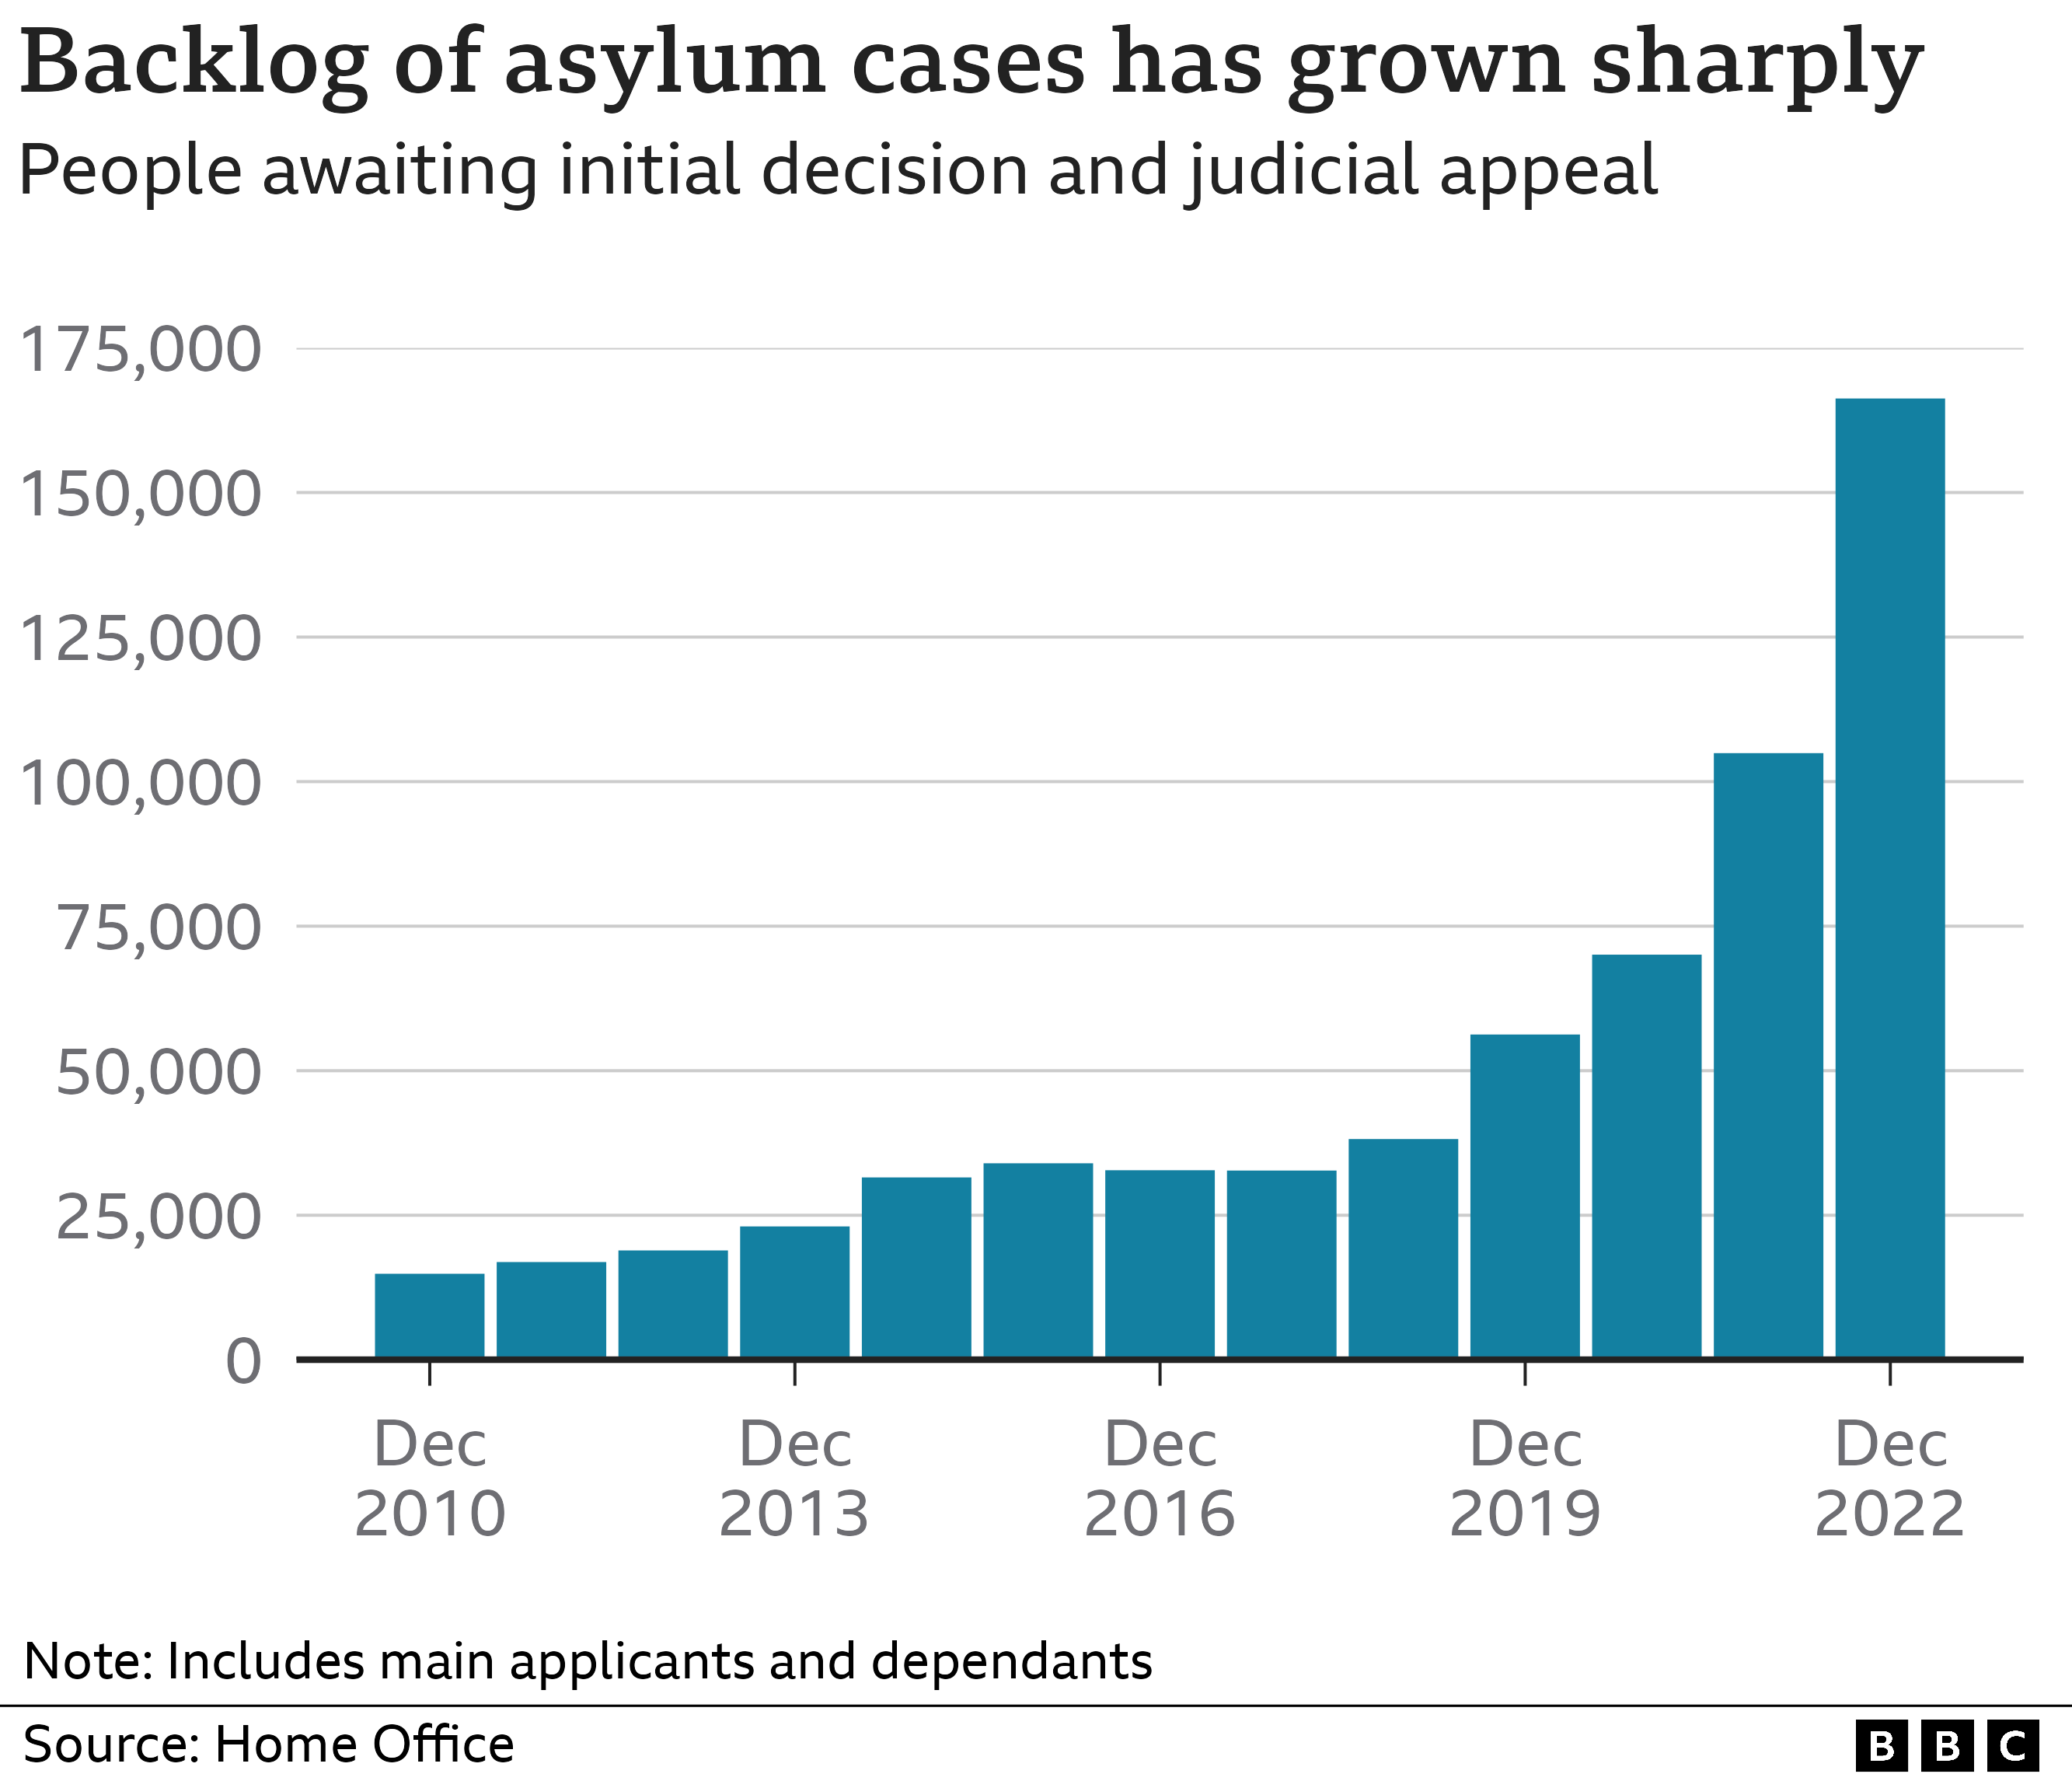 Chart showing the backlog of asylum cases (March 2023)